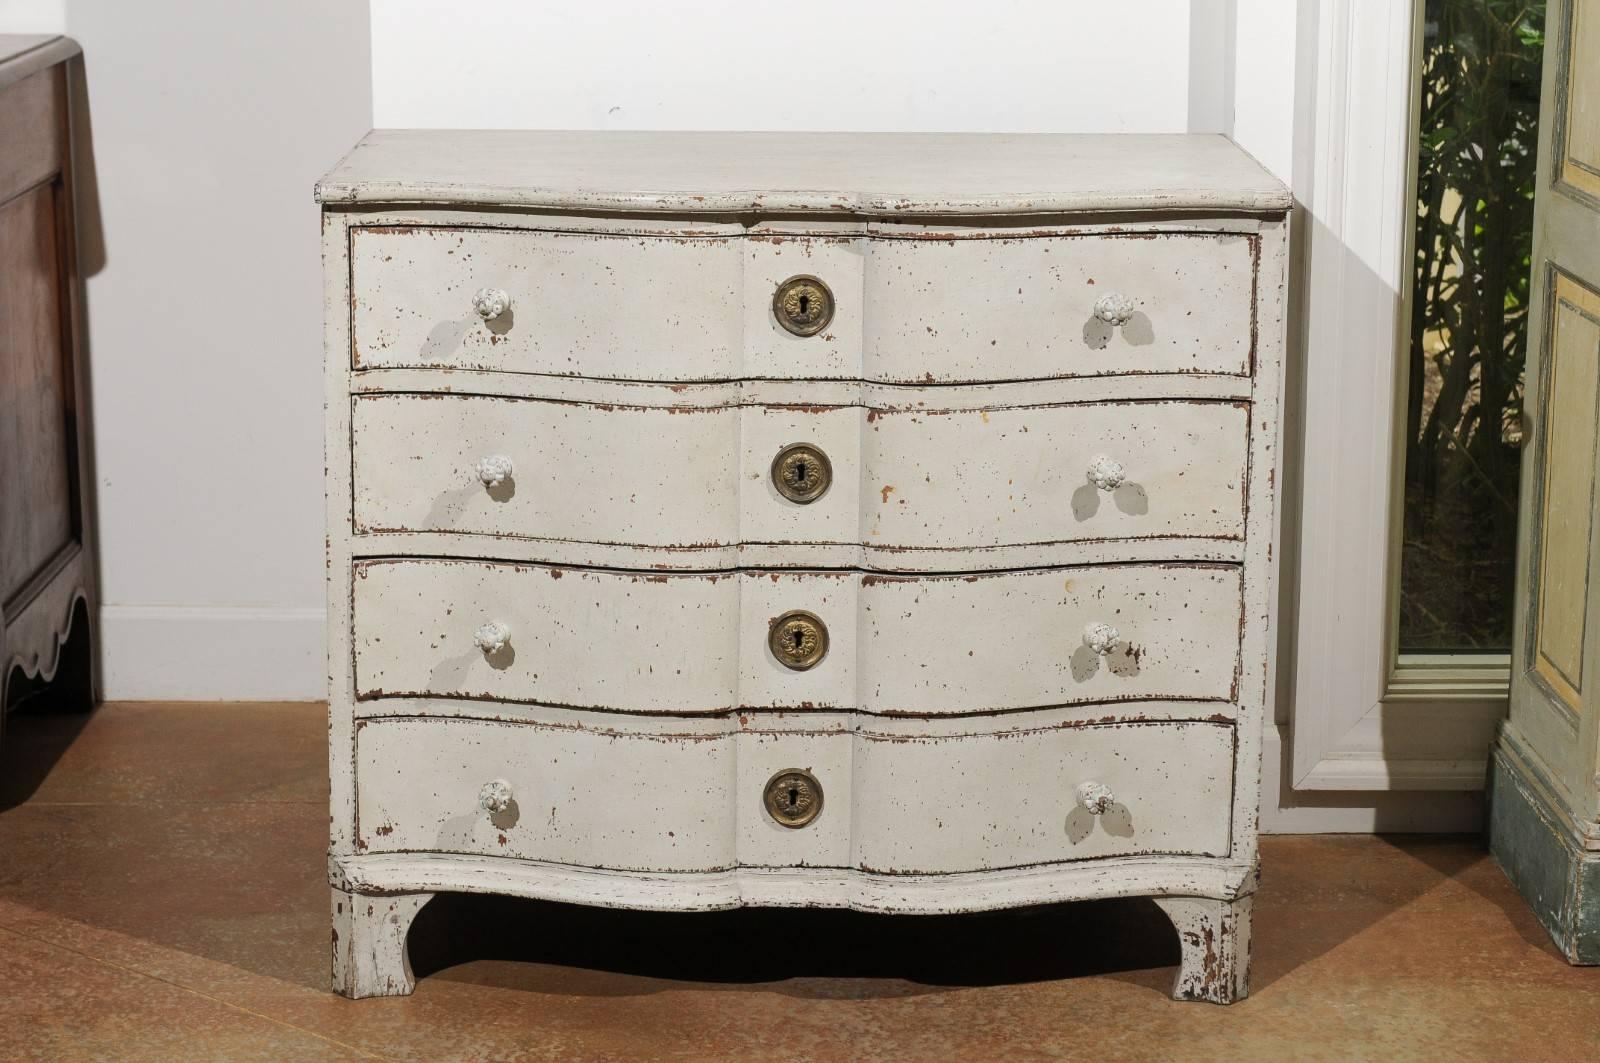 A Swedish painted wood serpentine four-drawer commode from the 19th century with bracket feet. This Swedish 19th century chest-of-drawers features a beautifully weathered finish, perfectly complimenting the crossbow shape of the piece. The façade